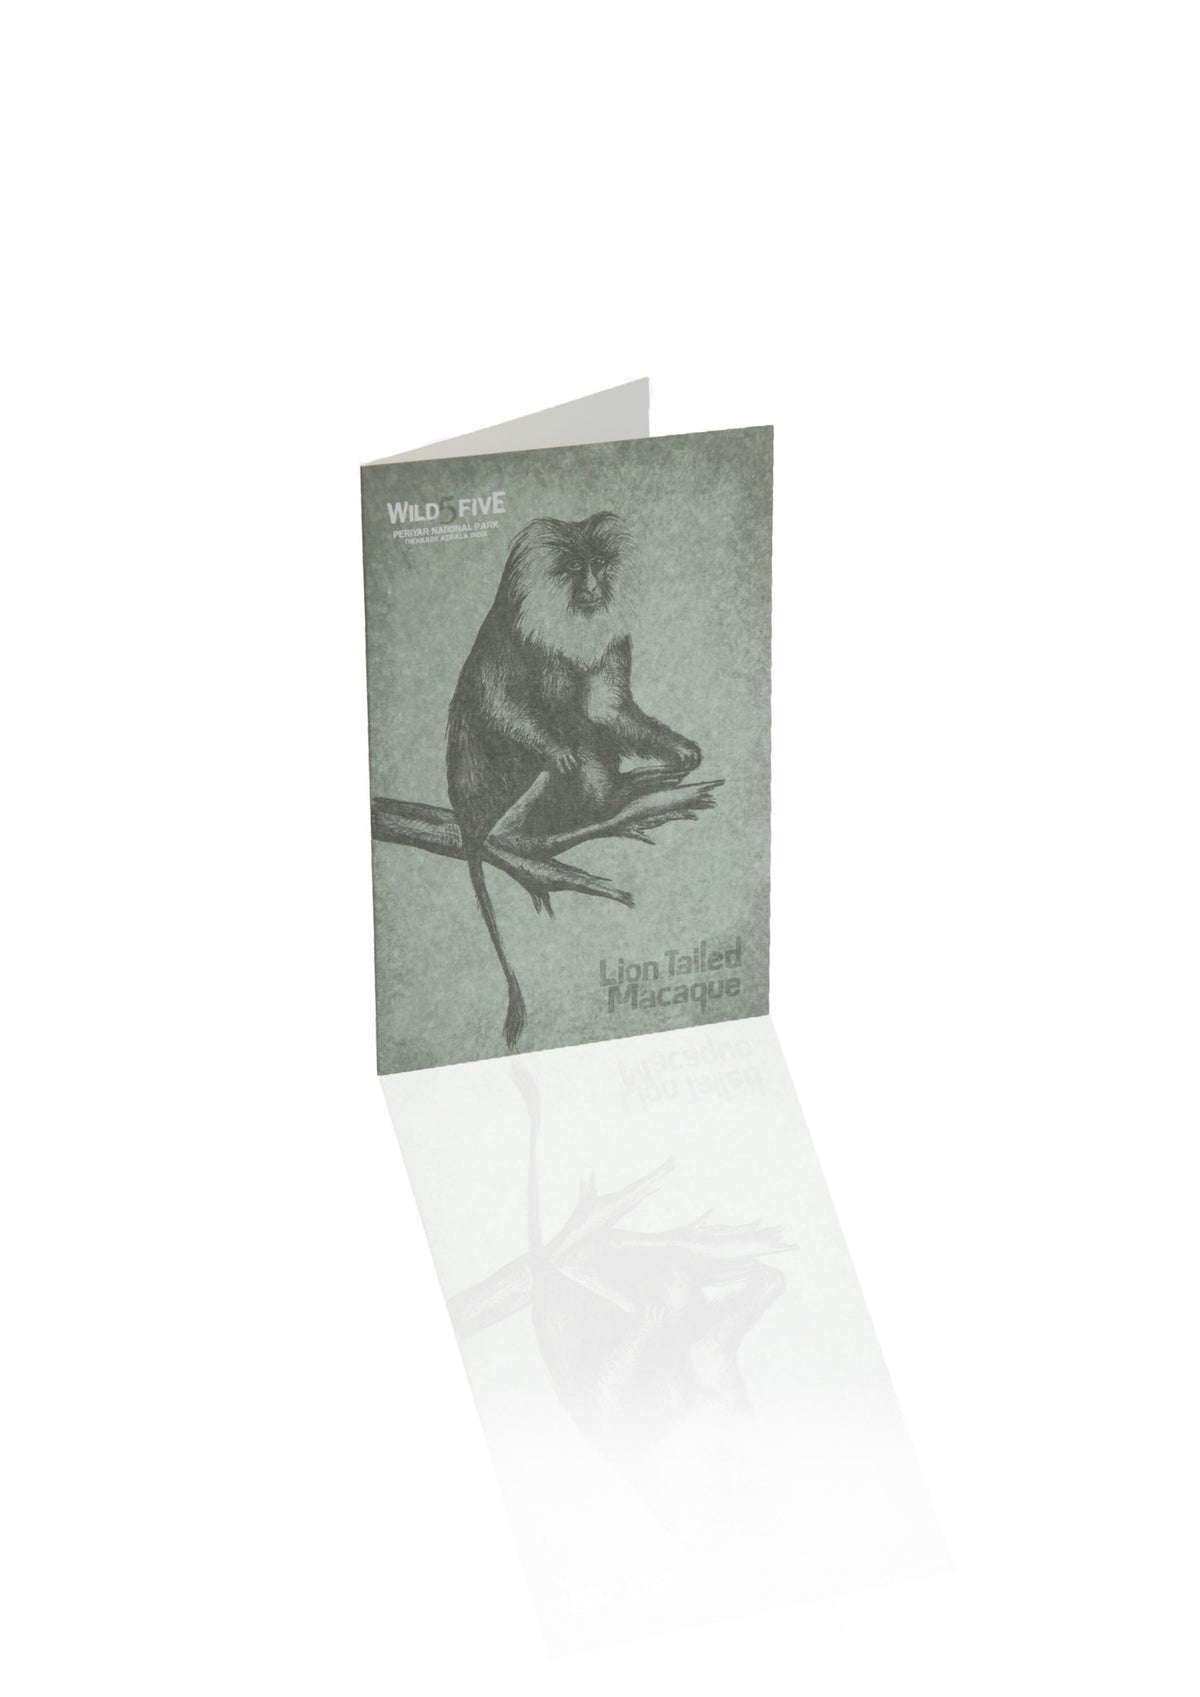 Wild 5 Five — Greeting Cards